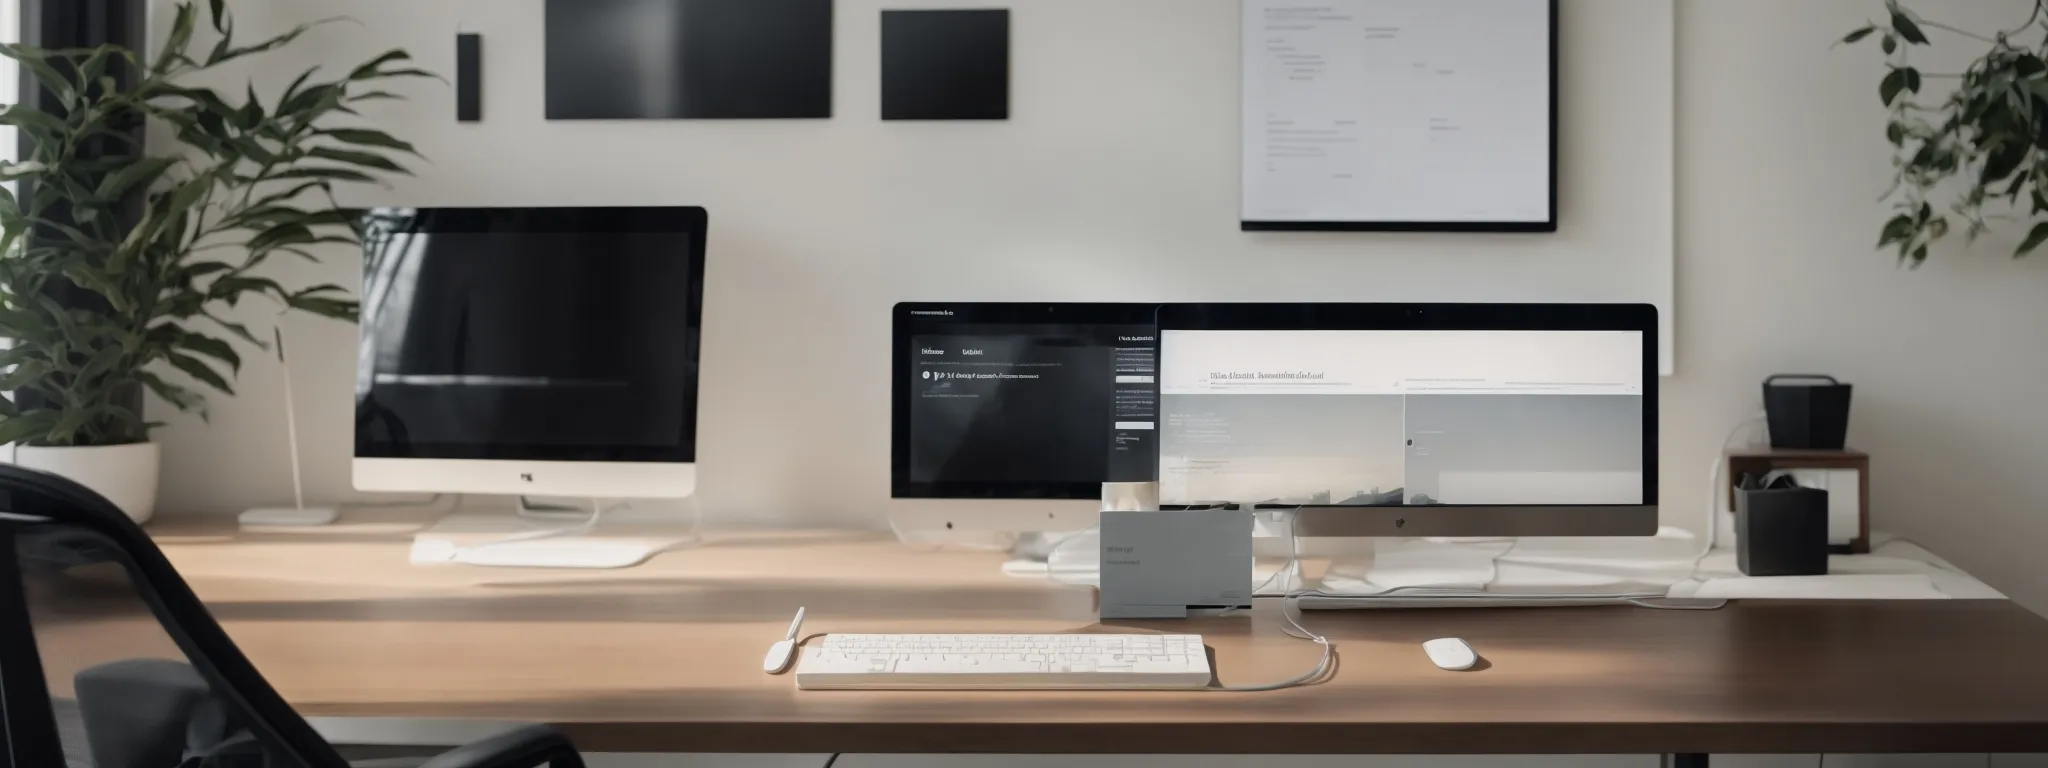 a minimalist office setup with a sleek, modern computer displaying a neatly coded website on its screen.